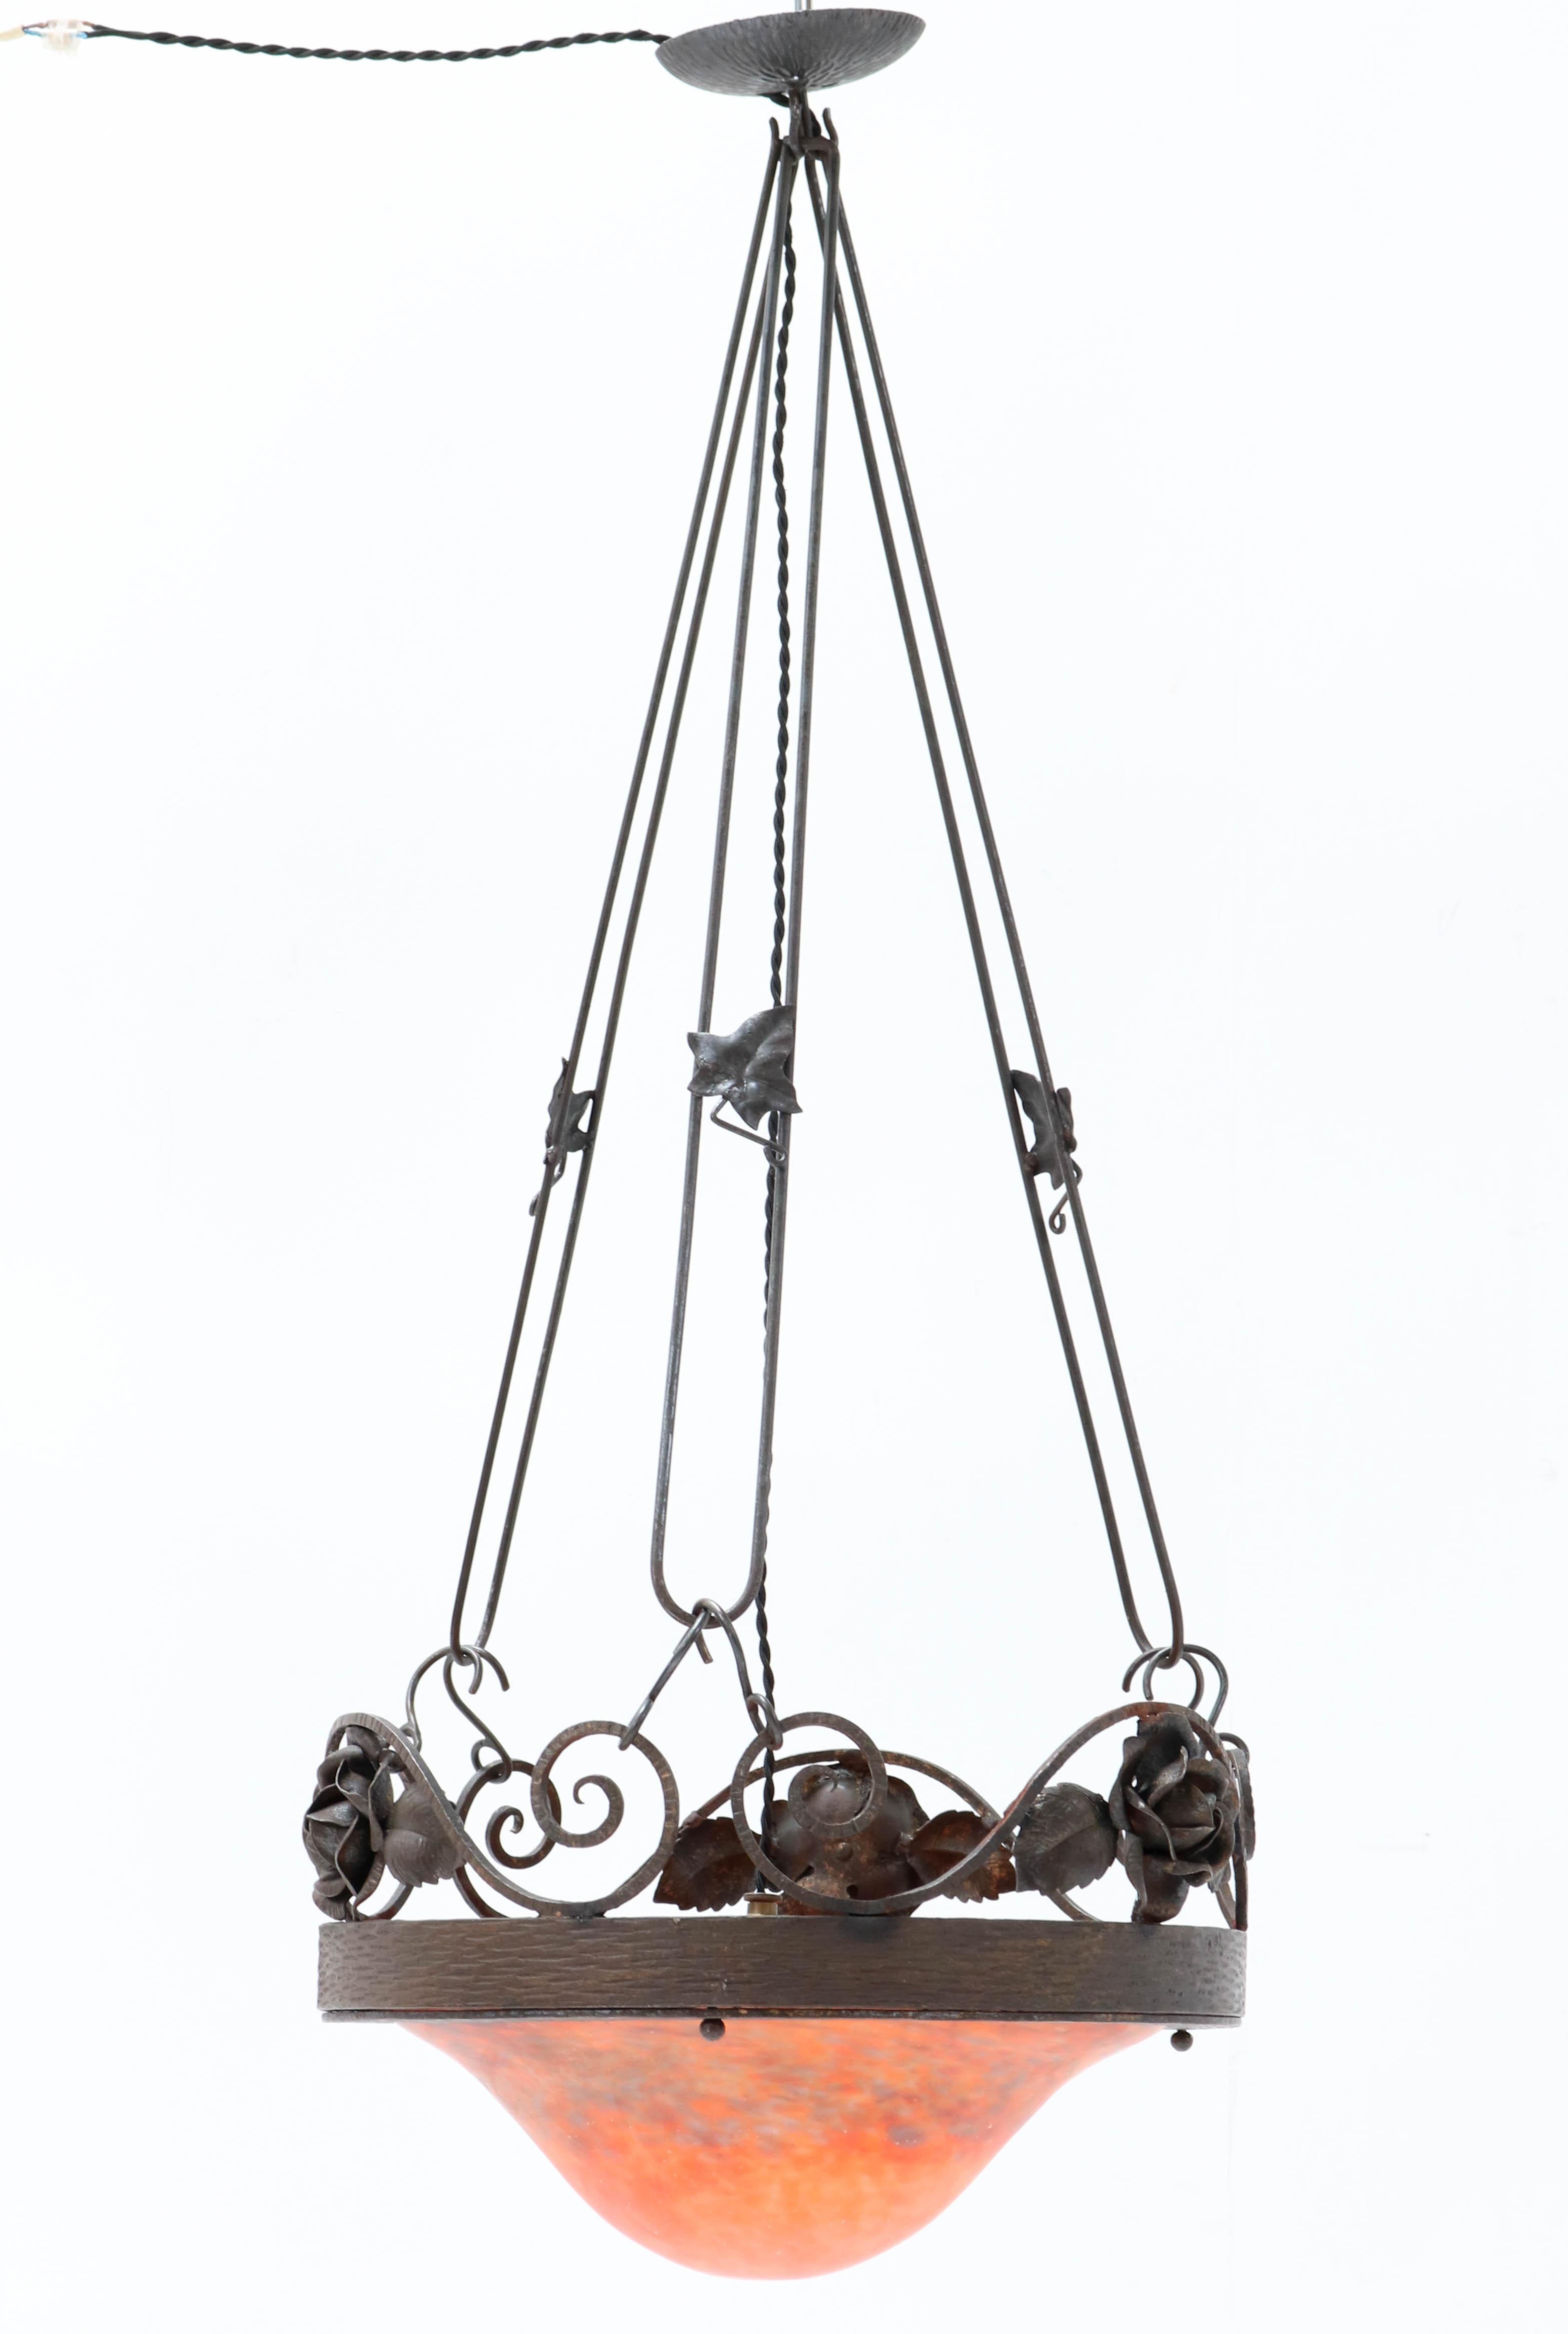 Early 20th Century French Art Nouveau Chandelier by Muller Frères Lunéville, 1900s For Sale